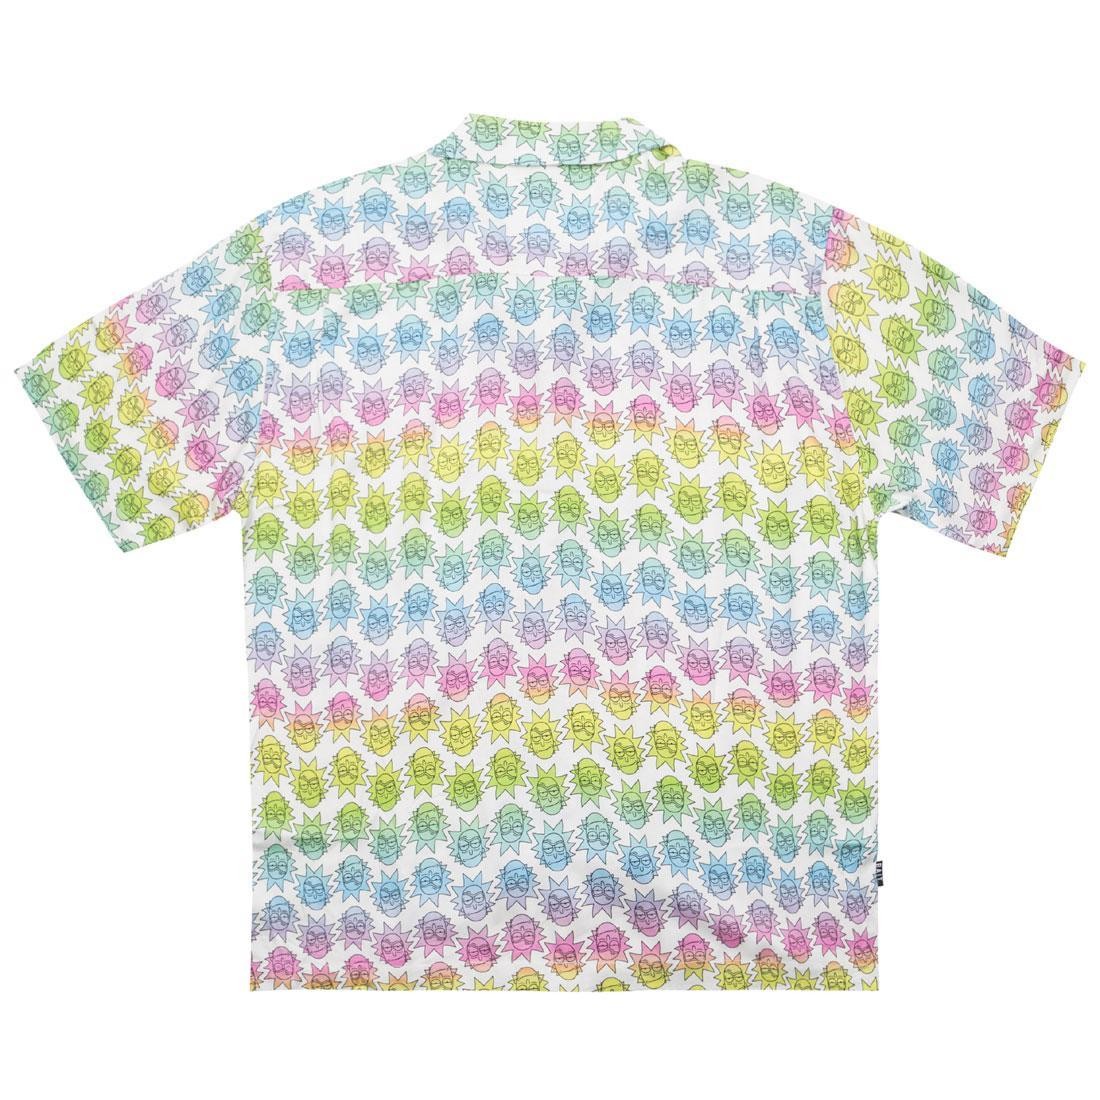 BAIT x Rick And Morty Men Face Hawaiian Button Up white rainbow face